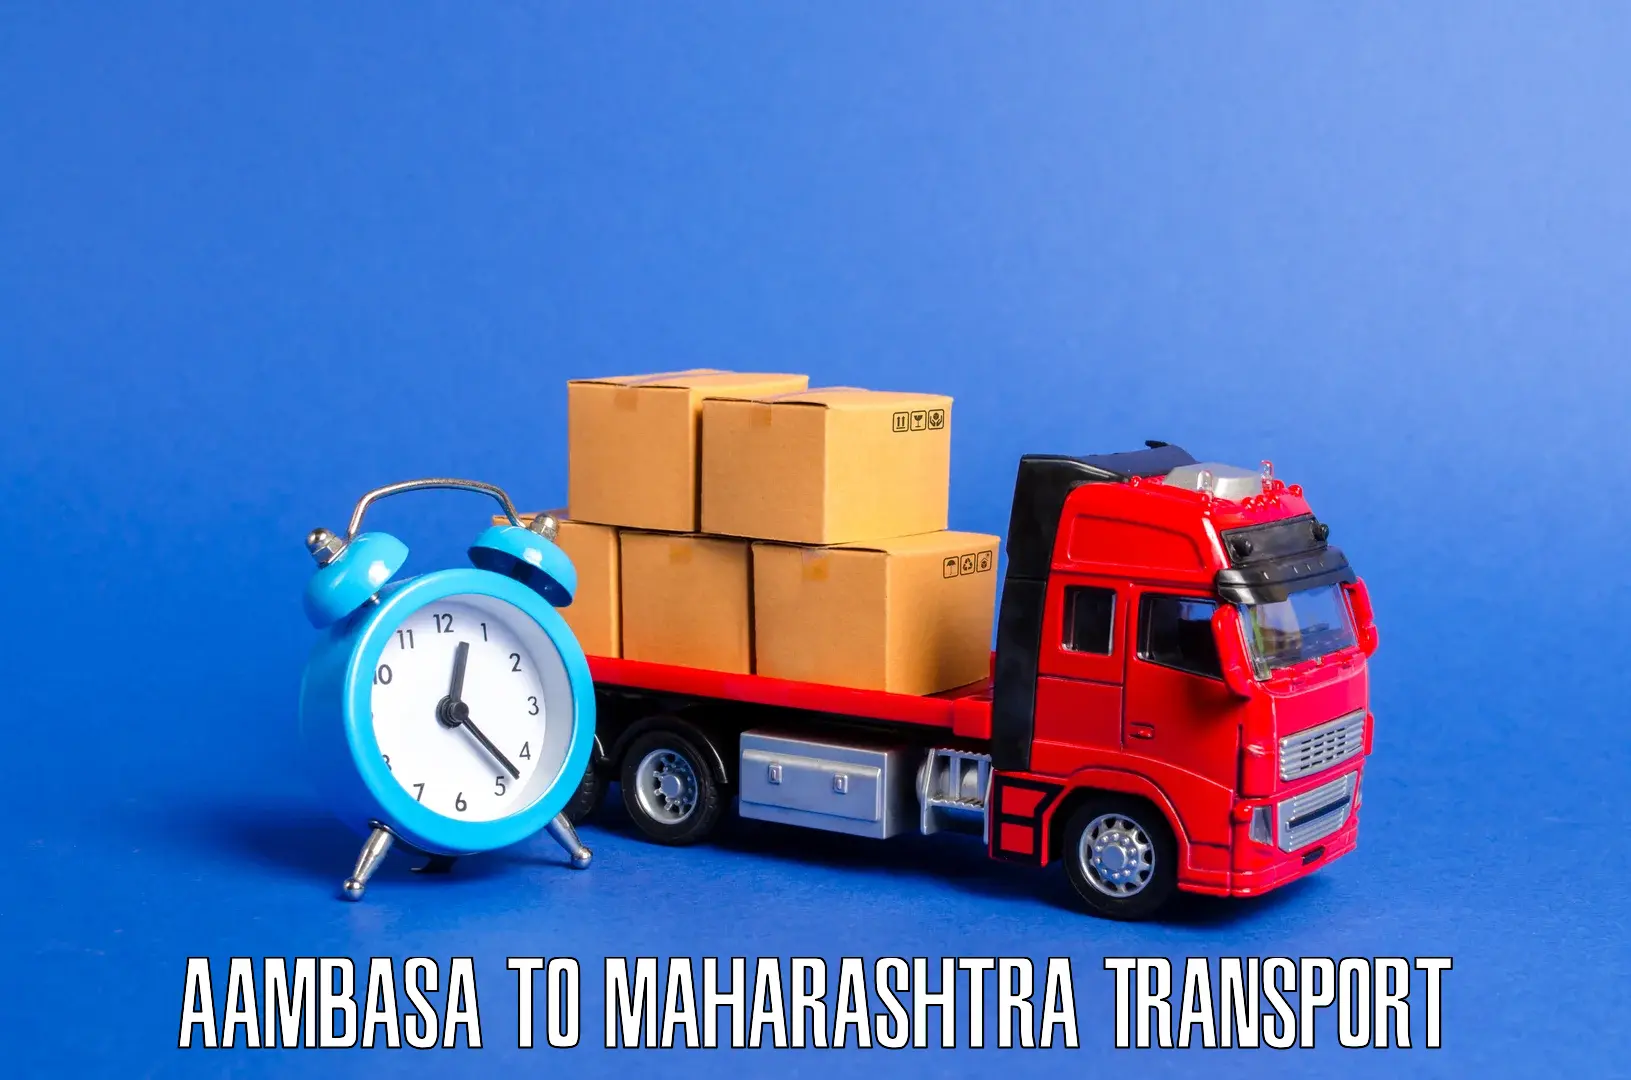 Transport bike from one state to another Aambasa to Chandrapur